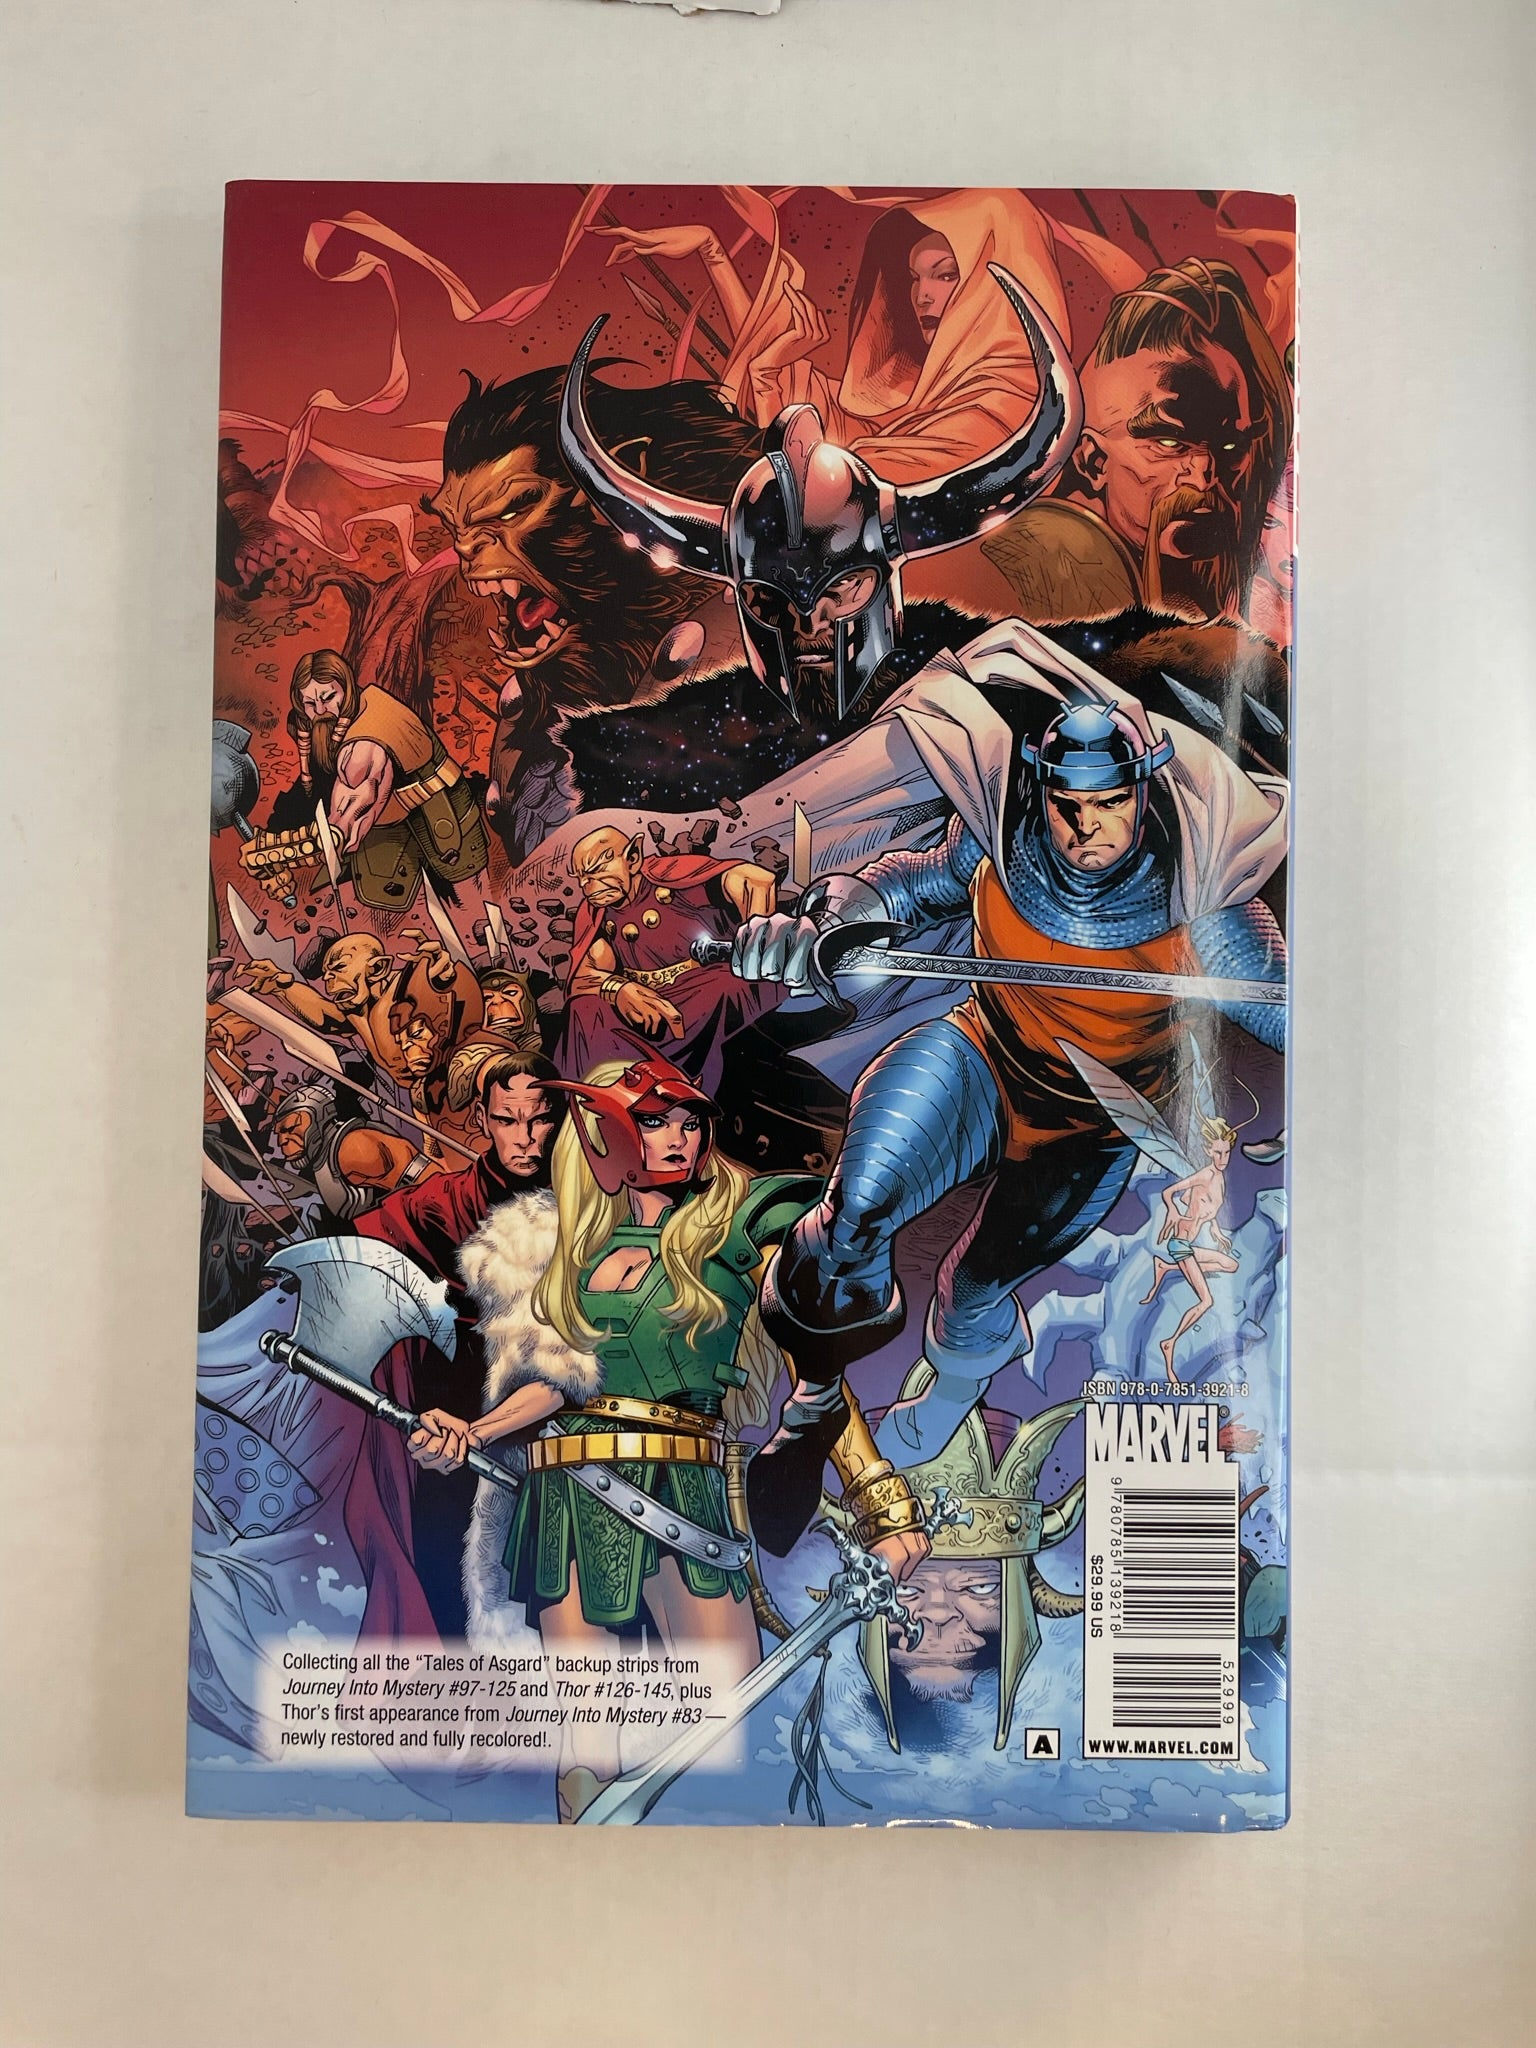 THOR: TALES OF ASGARD HARDCOVER - NEW OPENED STOCK